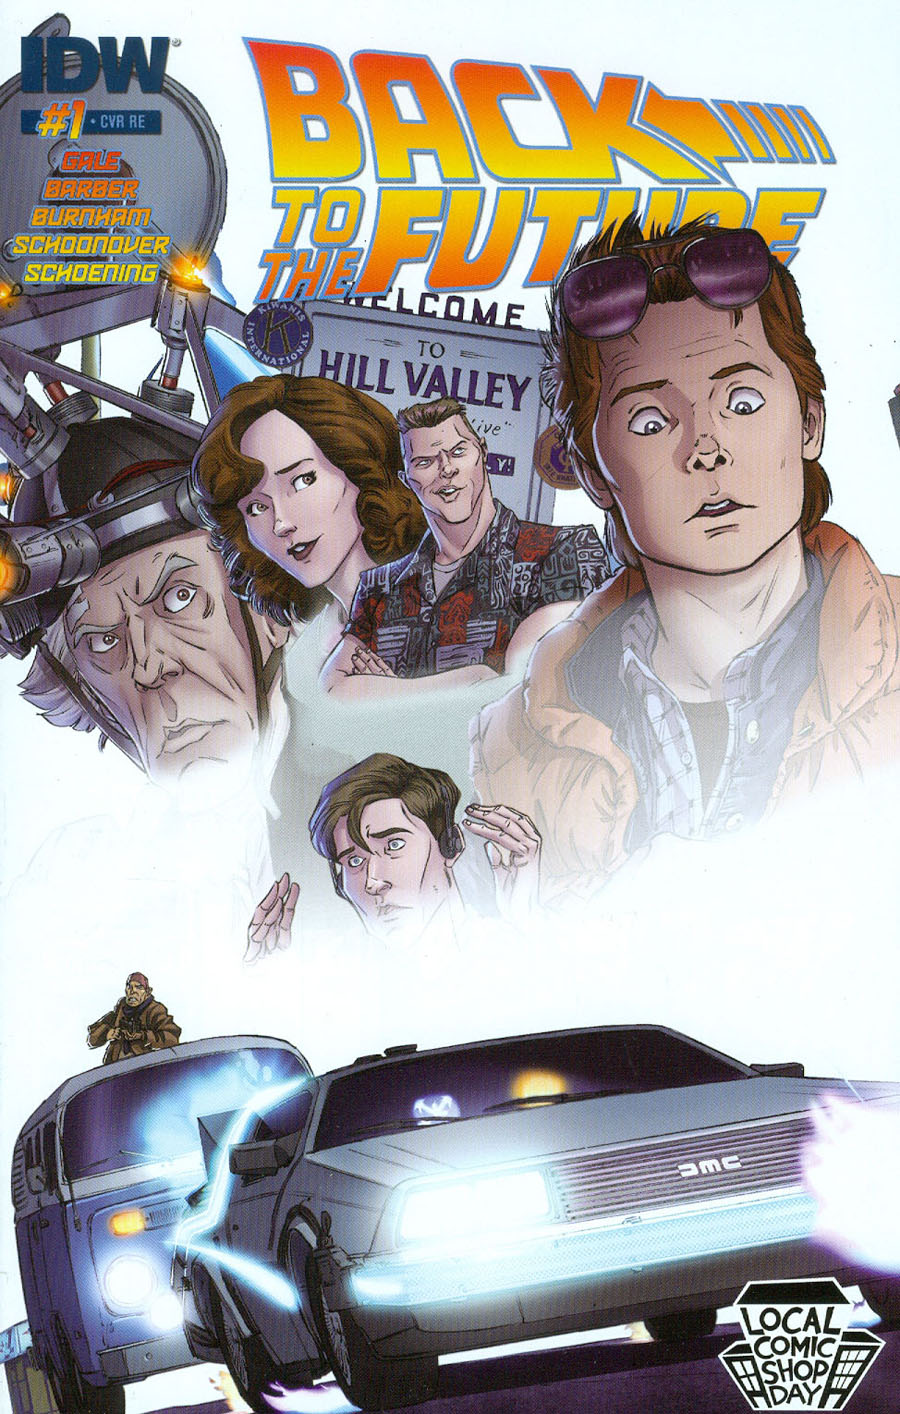 LCSD 2015 Back To The Future Vol 2 #1 Variant LCSD Cover